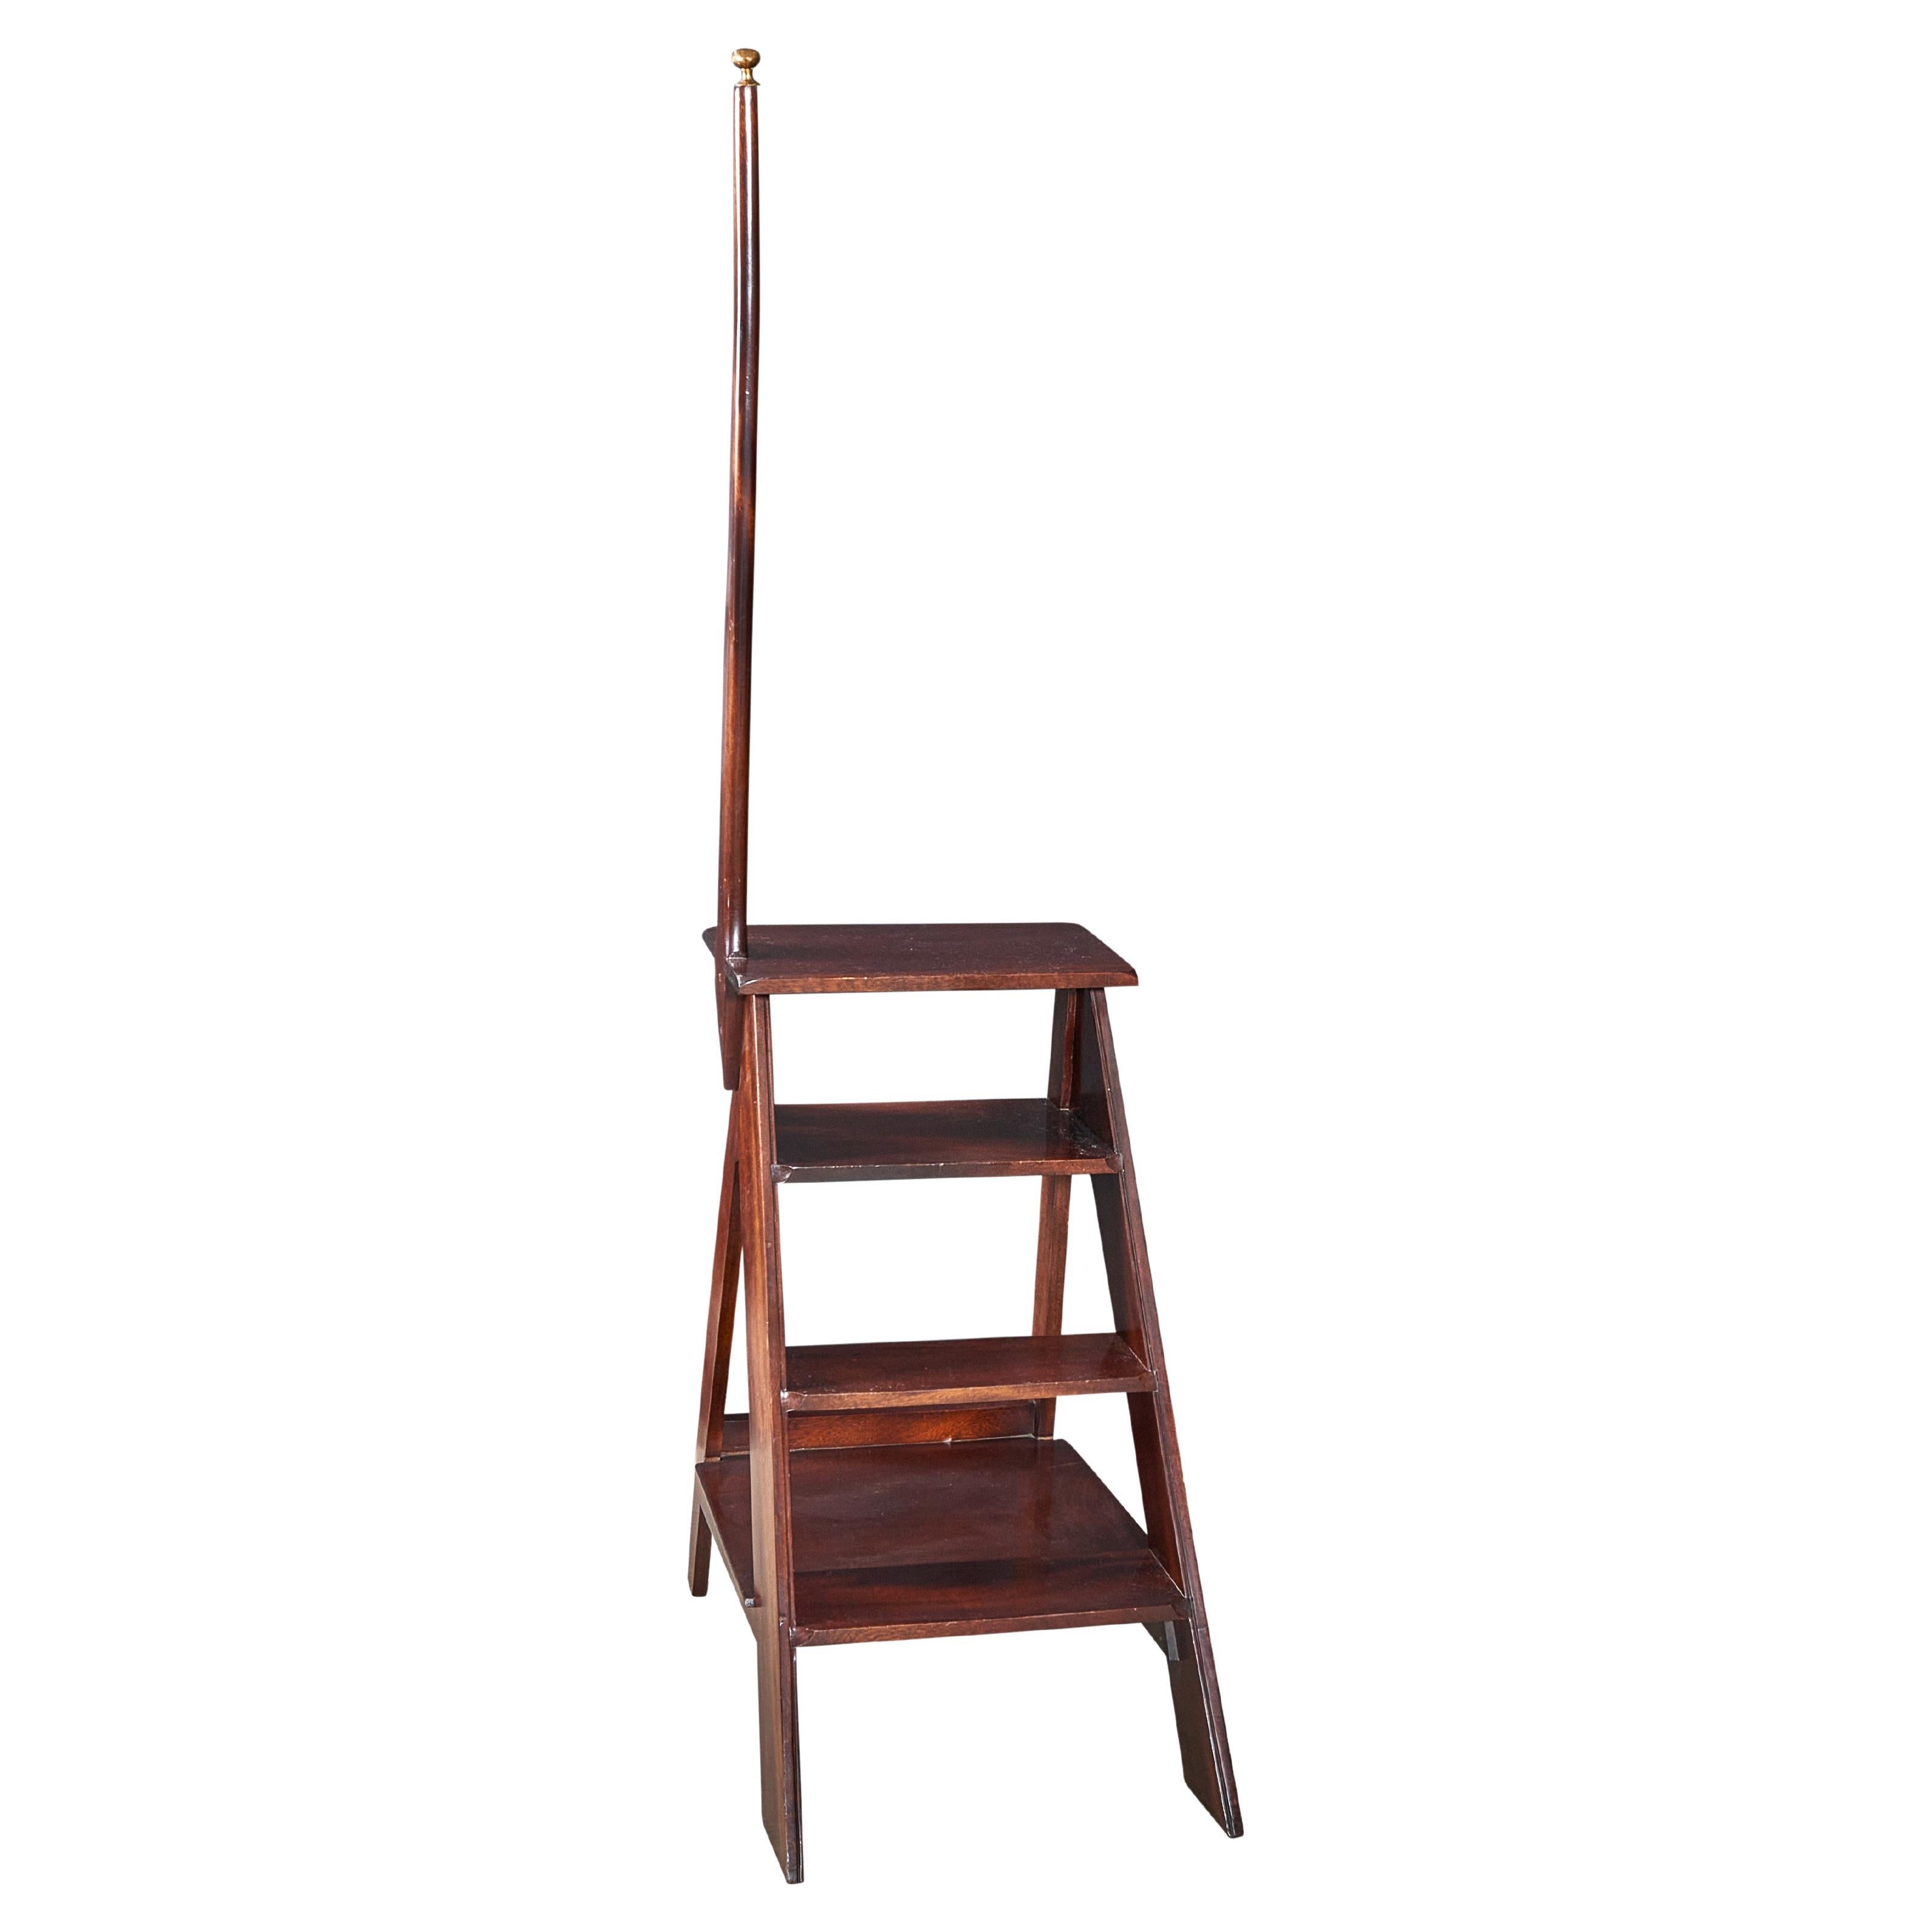 Very nice library ladder with brass top handle. Rare and fun. Very cool. 

